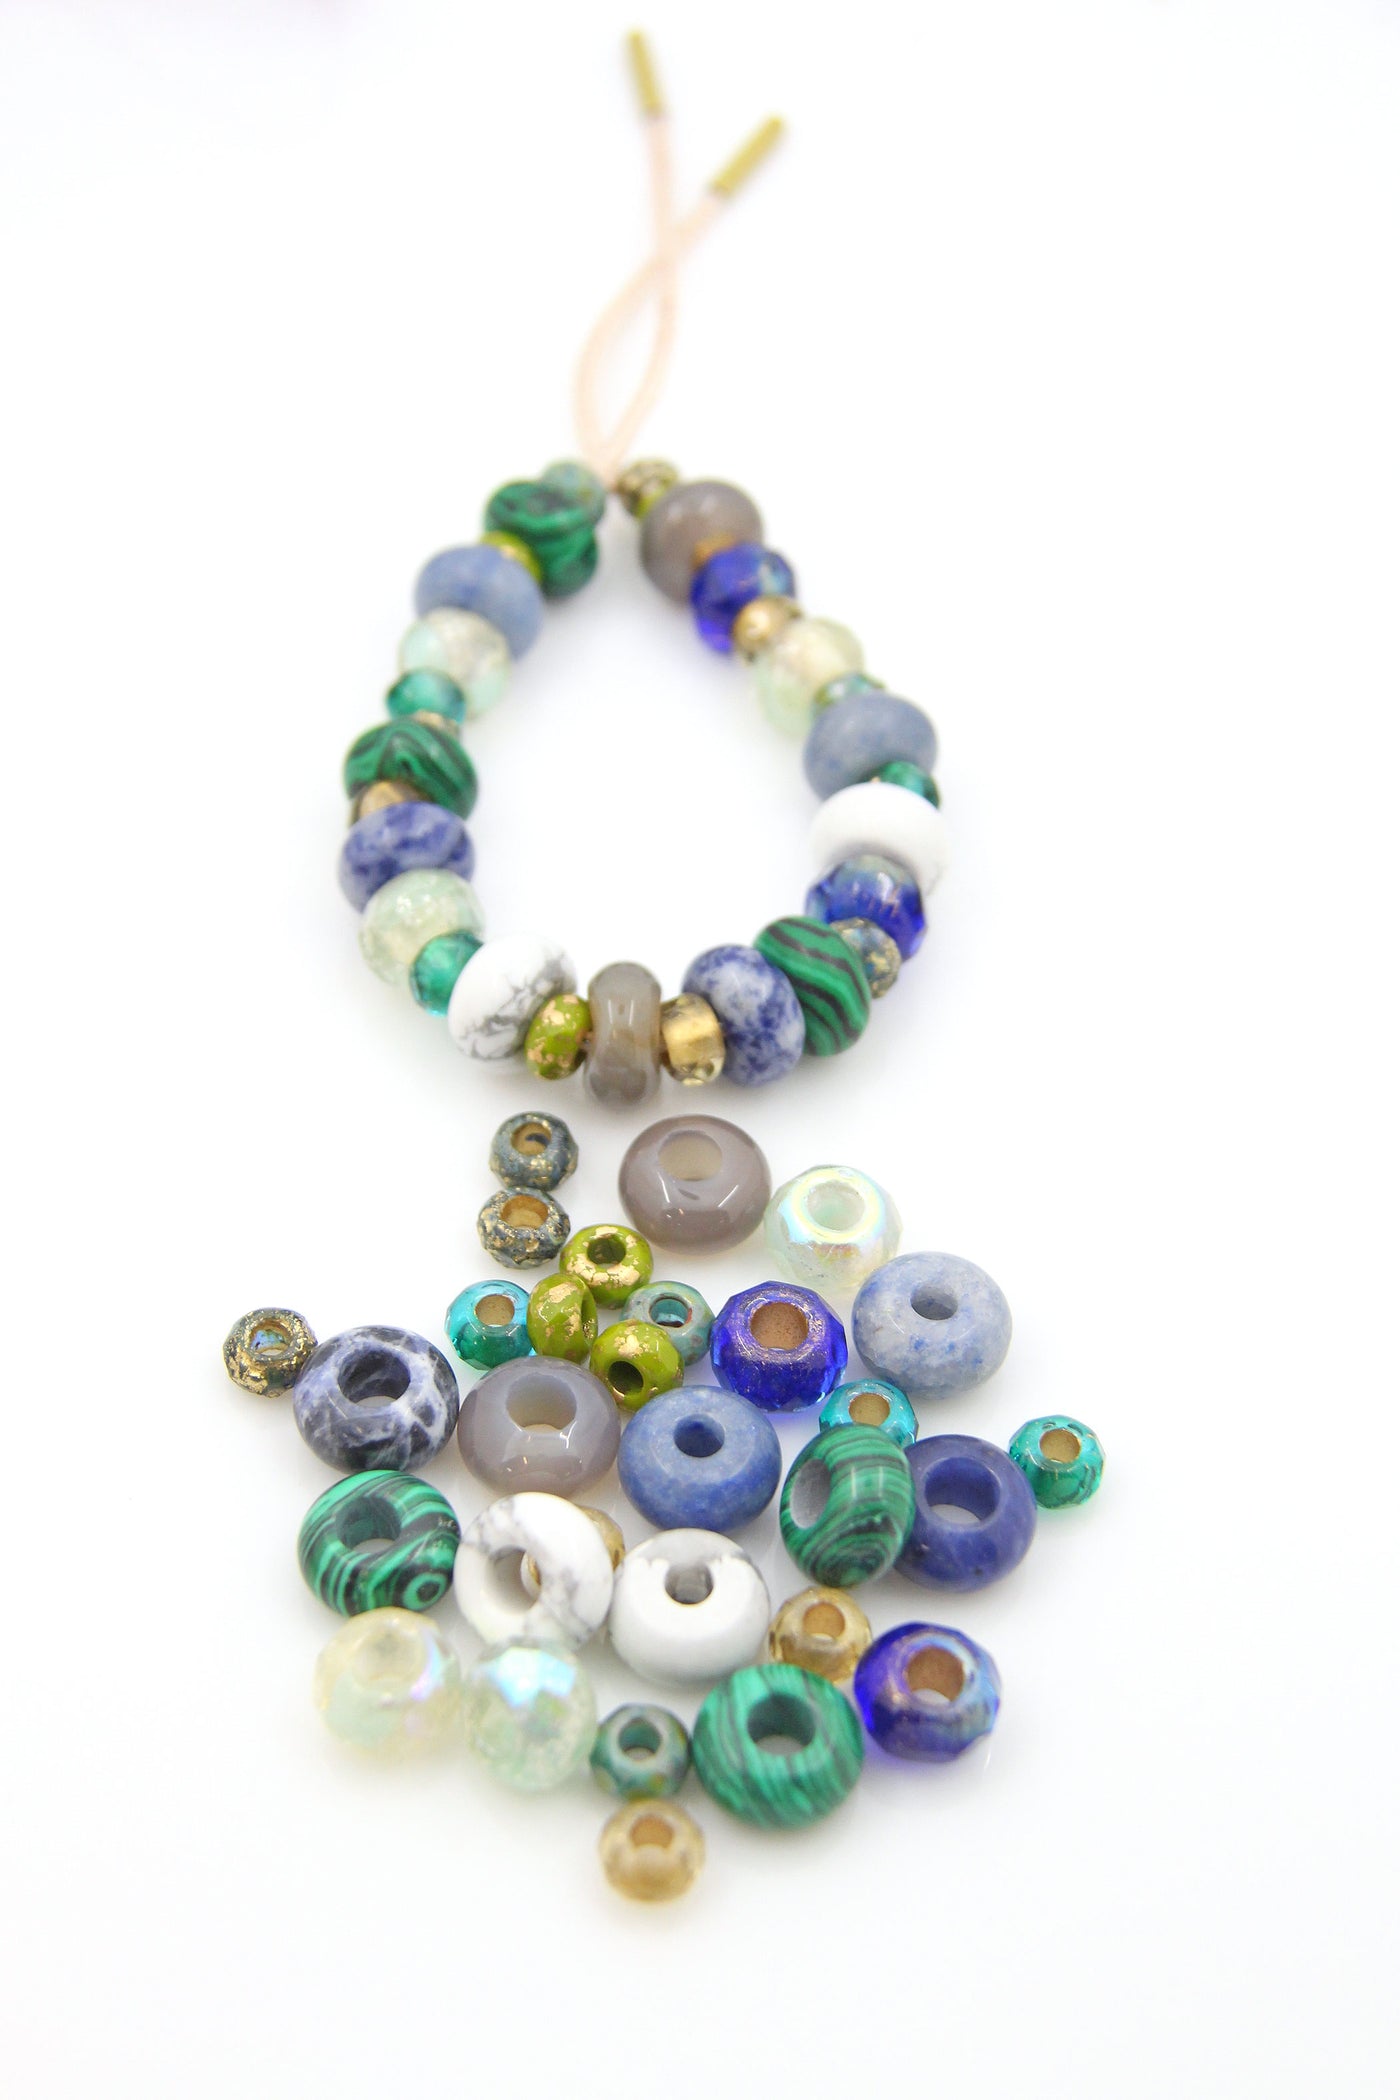 Blue, Green, Gold, faceted large hole beads for Tie On Bracelet or Necklace